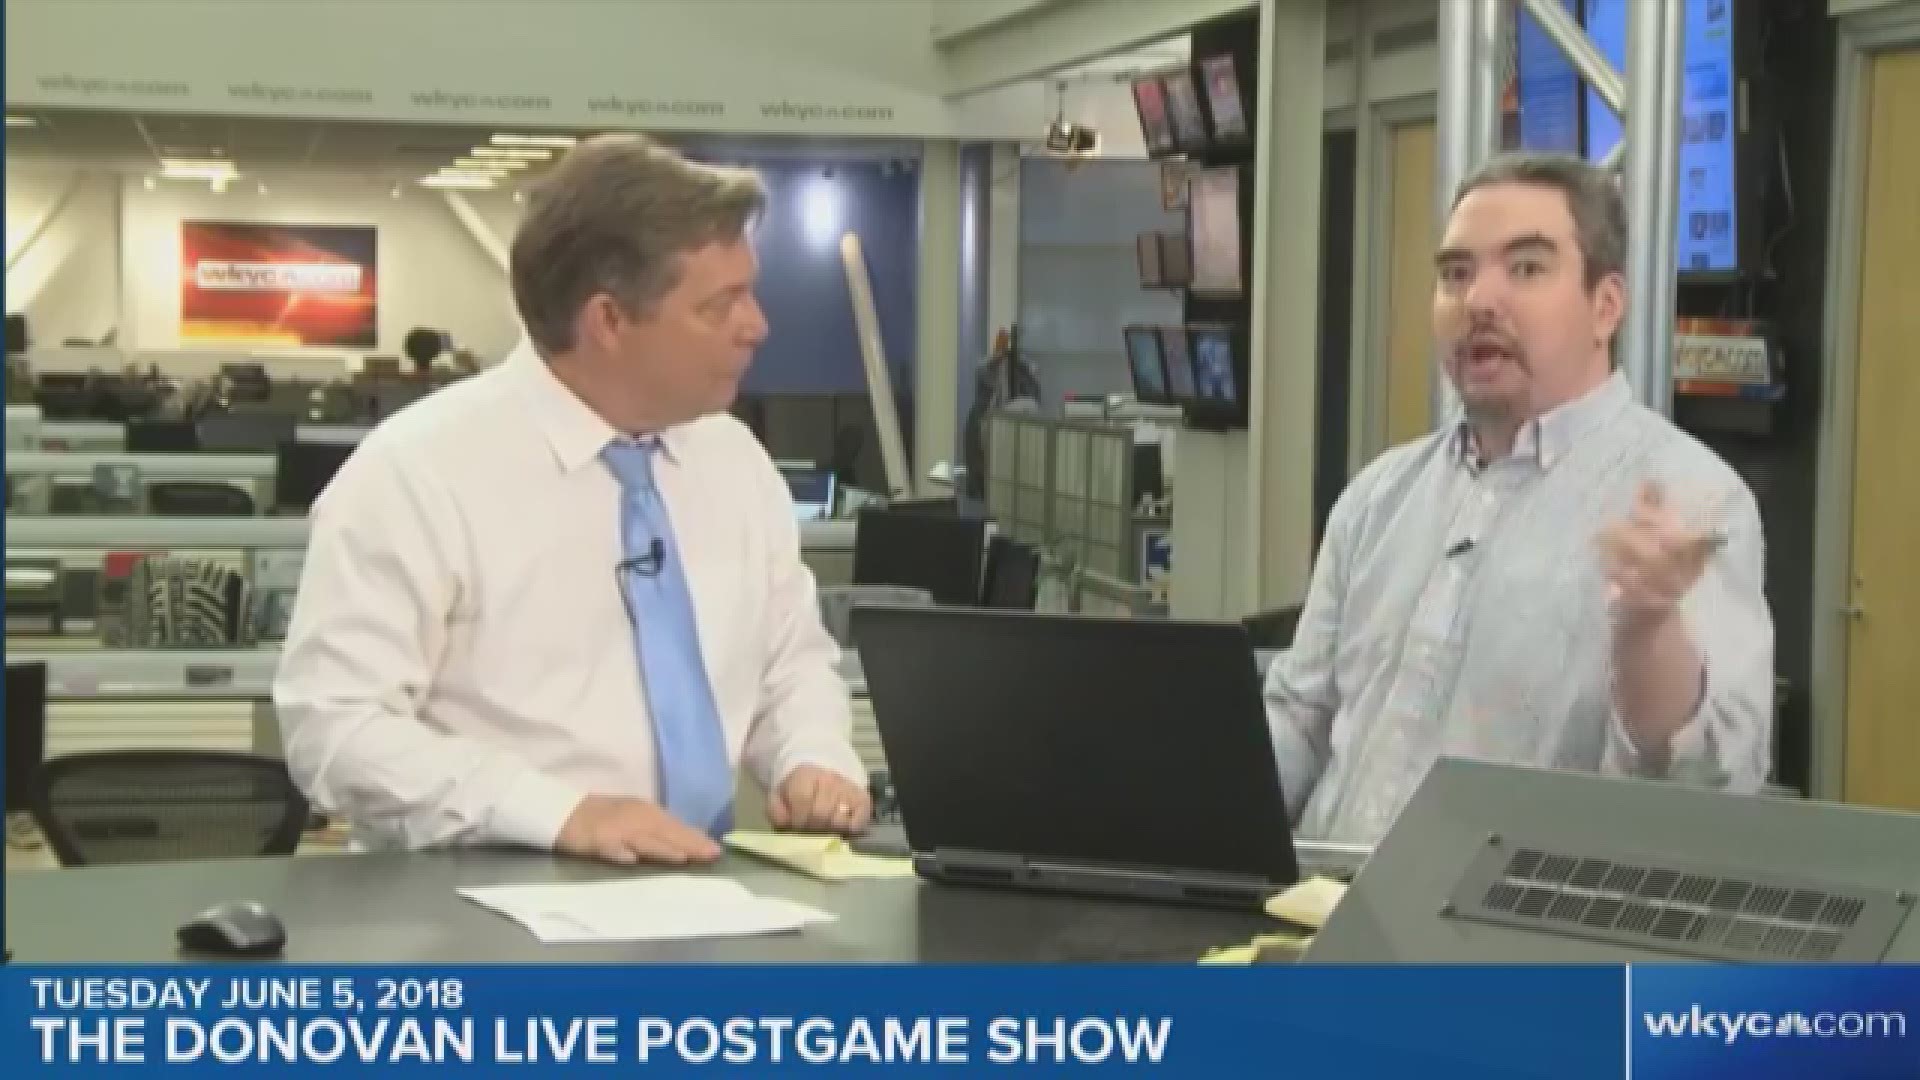 Can the Cleveland Cavaliers rally at home in NBA Finals? Donovan Live Postgame Show